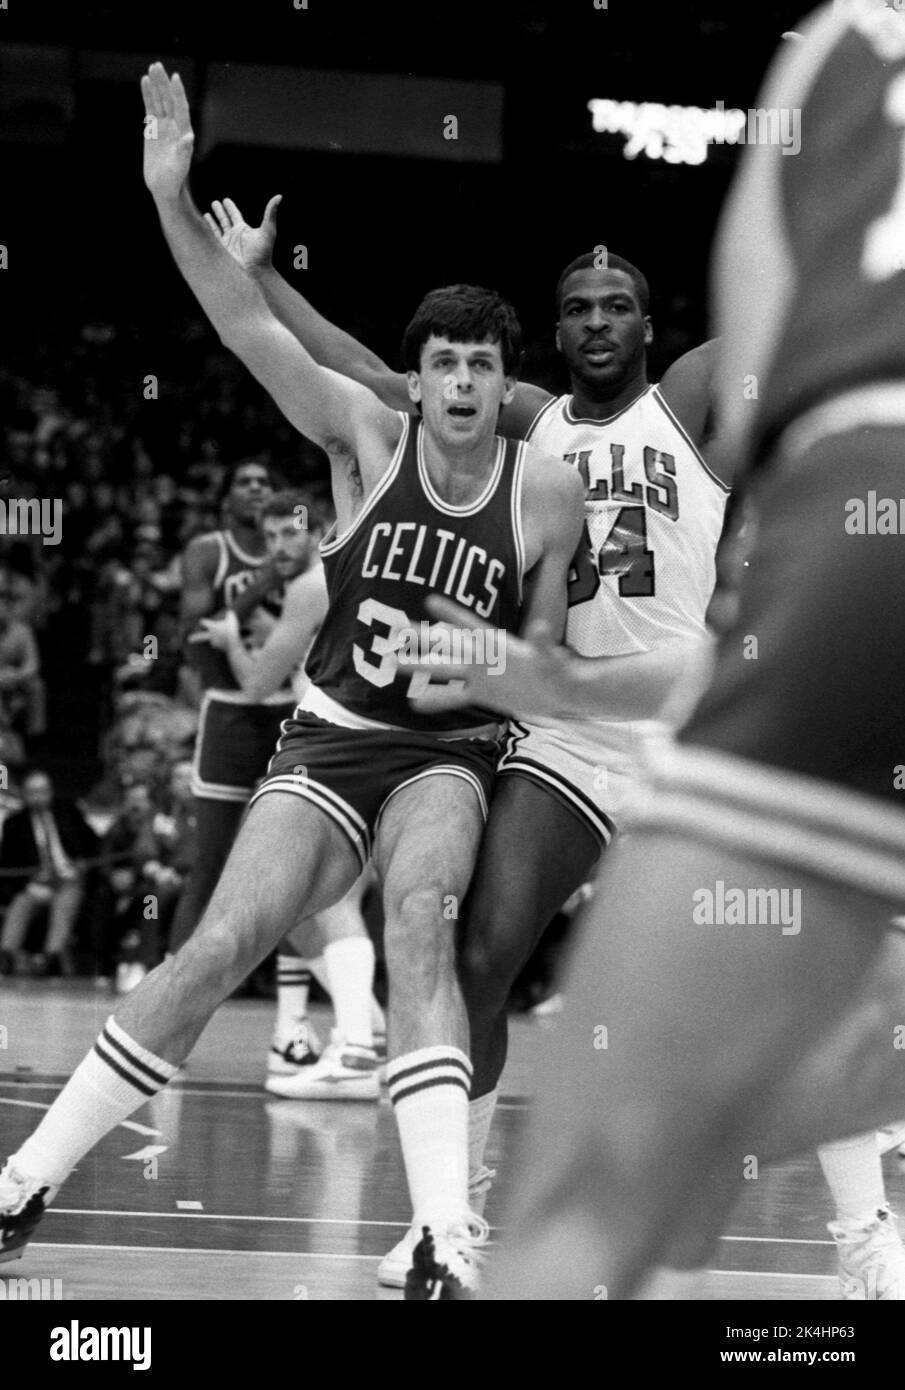 Kevin McHale of the Boston Celtics is shown in NBA action against the Chicago Bulls, c. 1988. Stock Photo